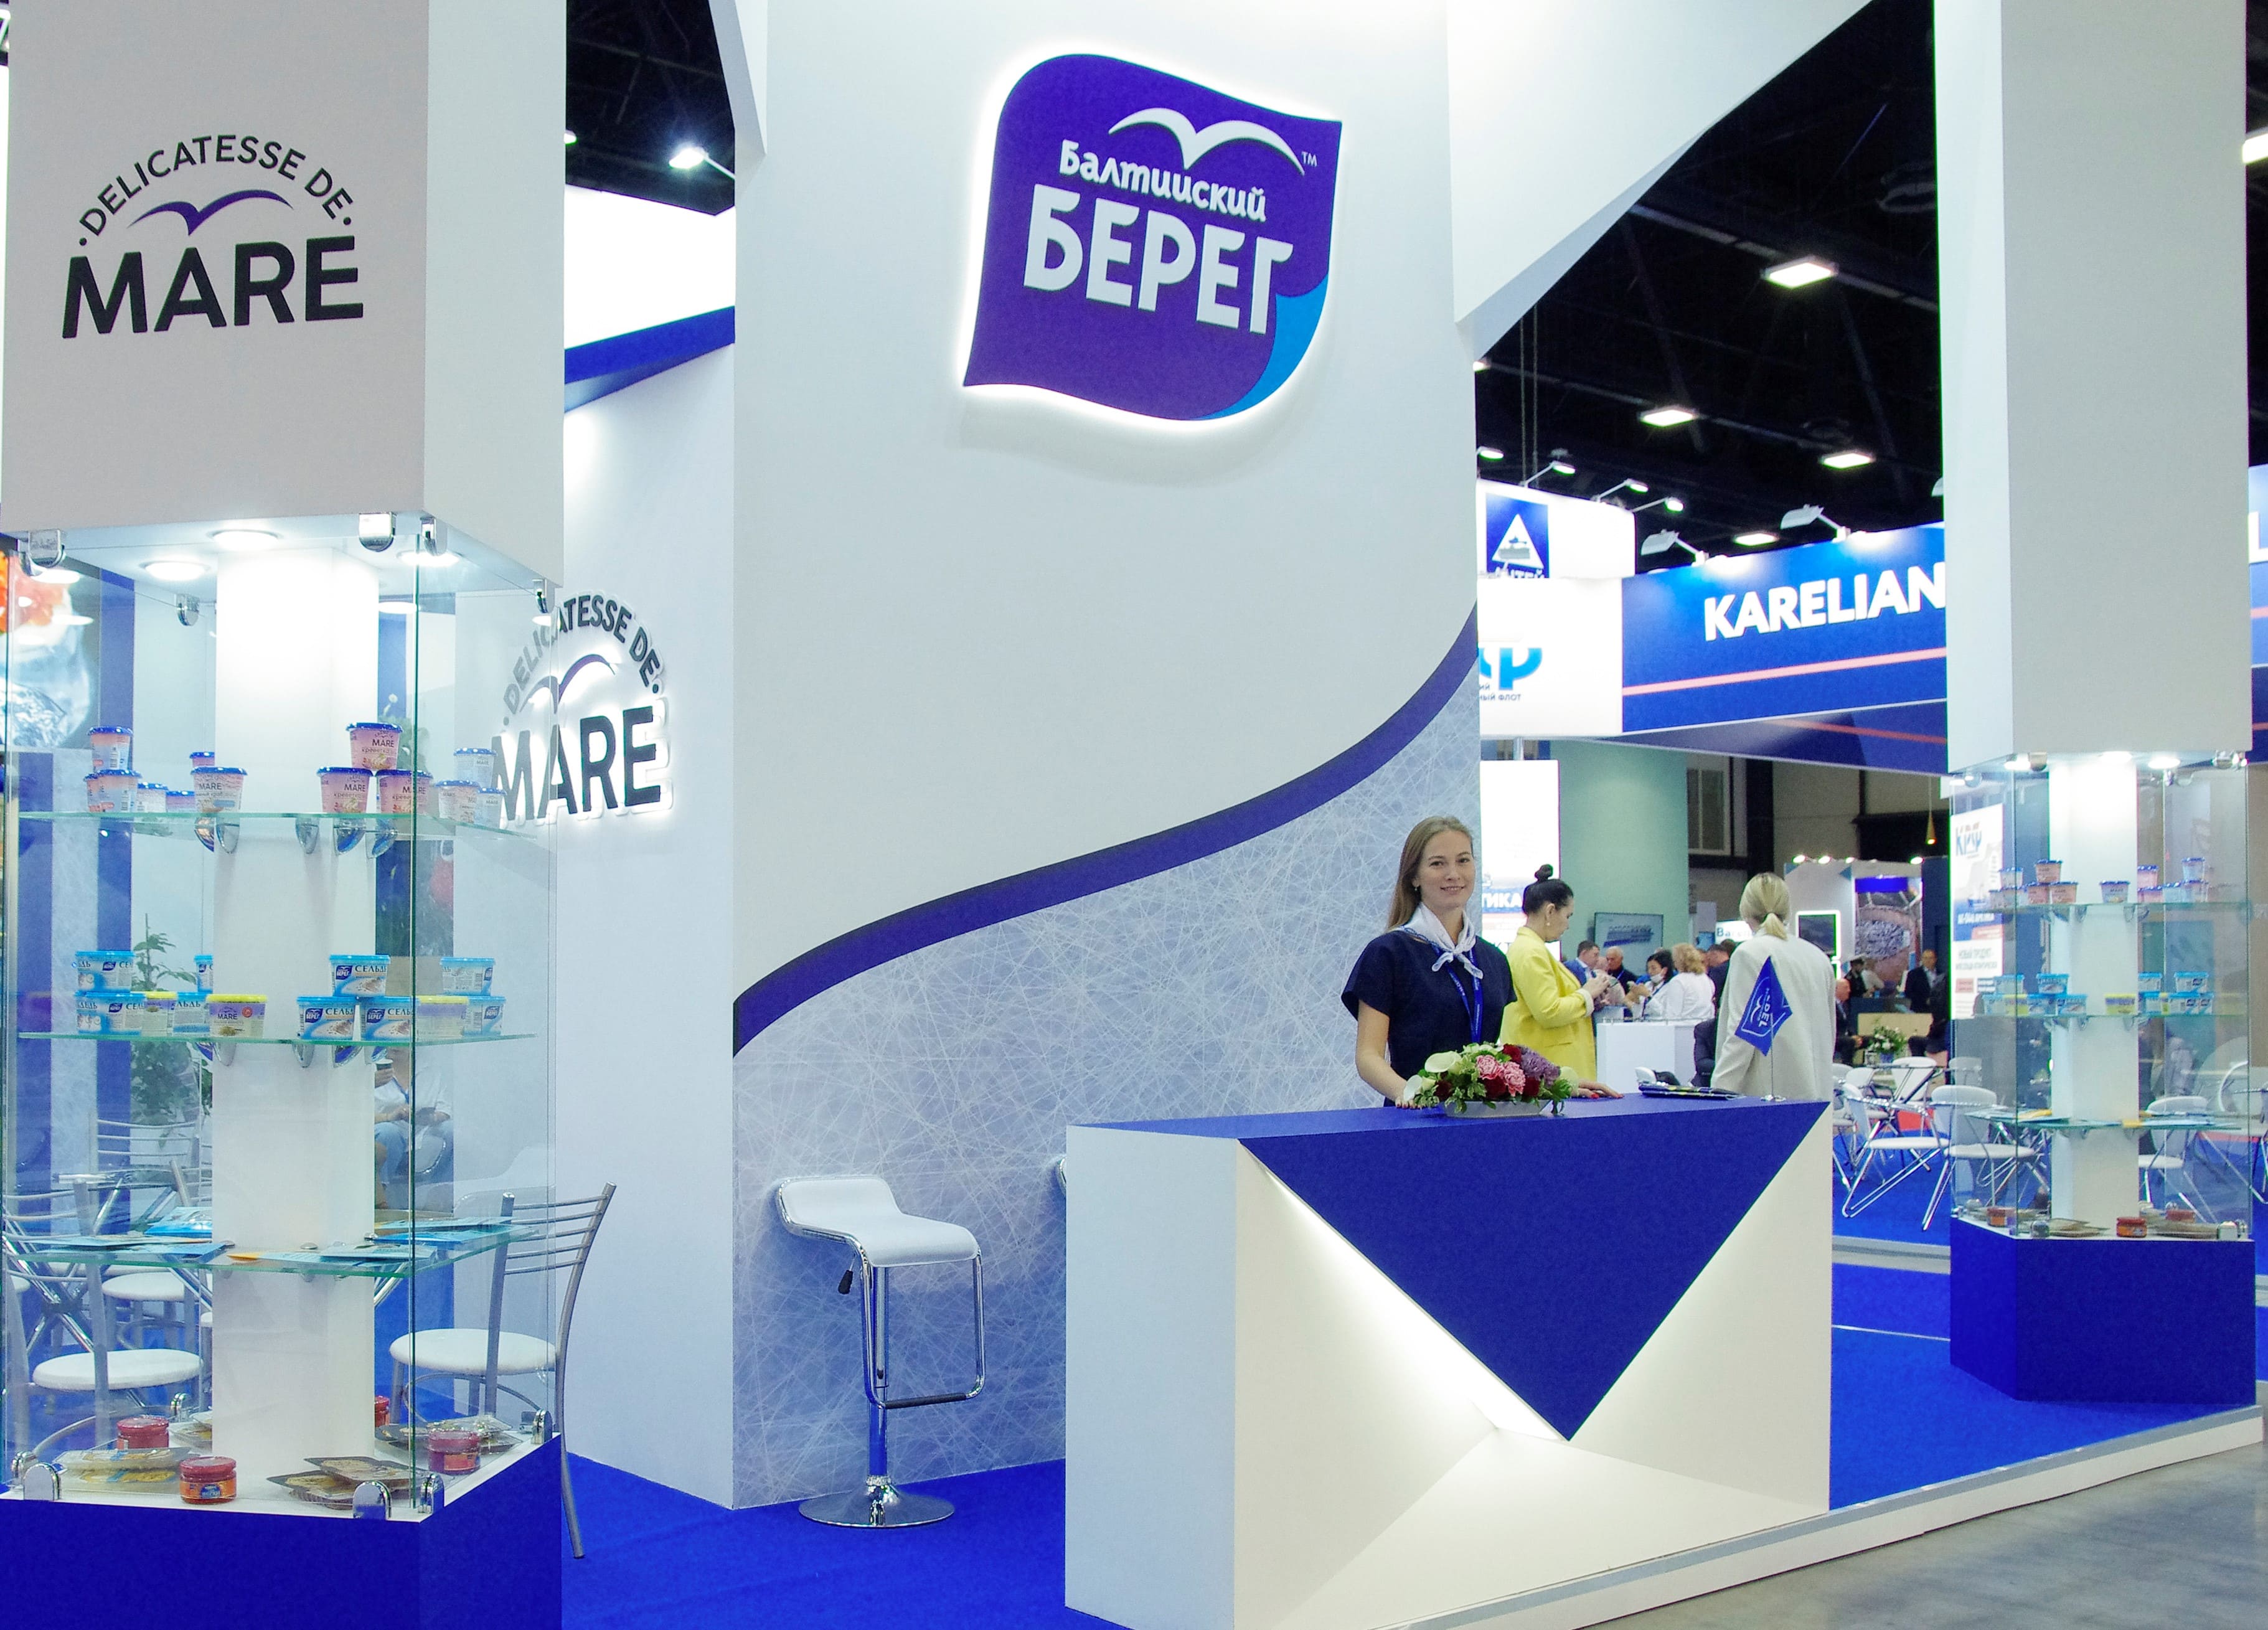 Baltic Coast presented products of deep processing from sprat